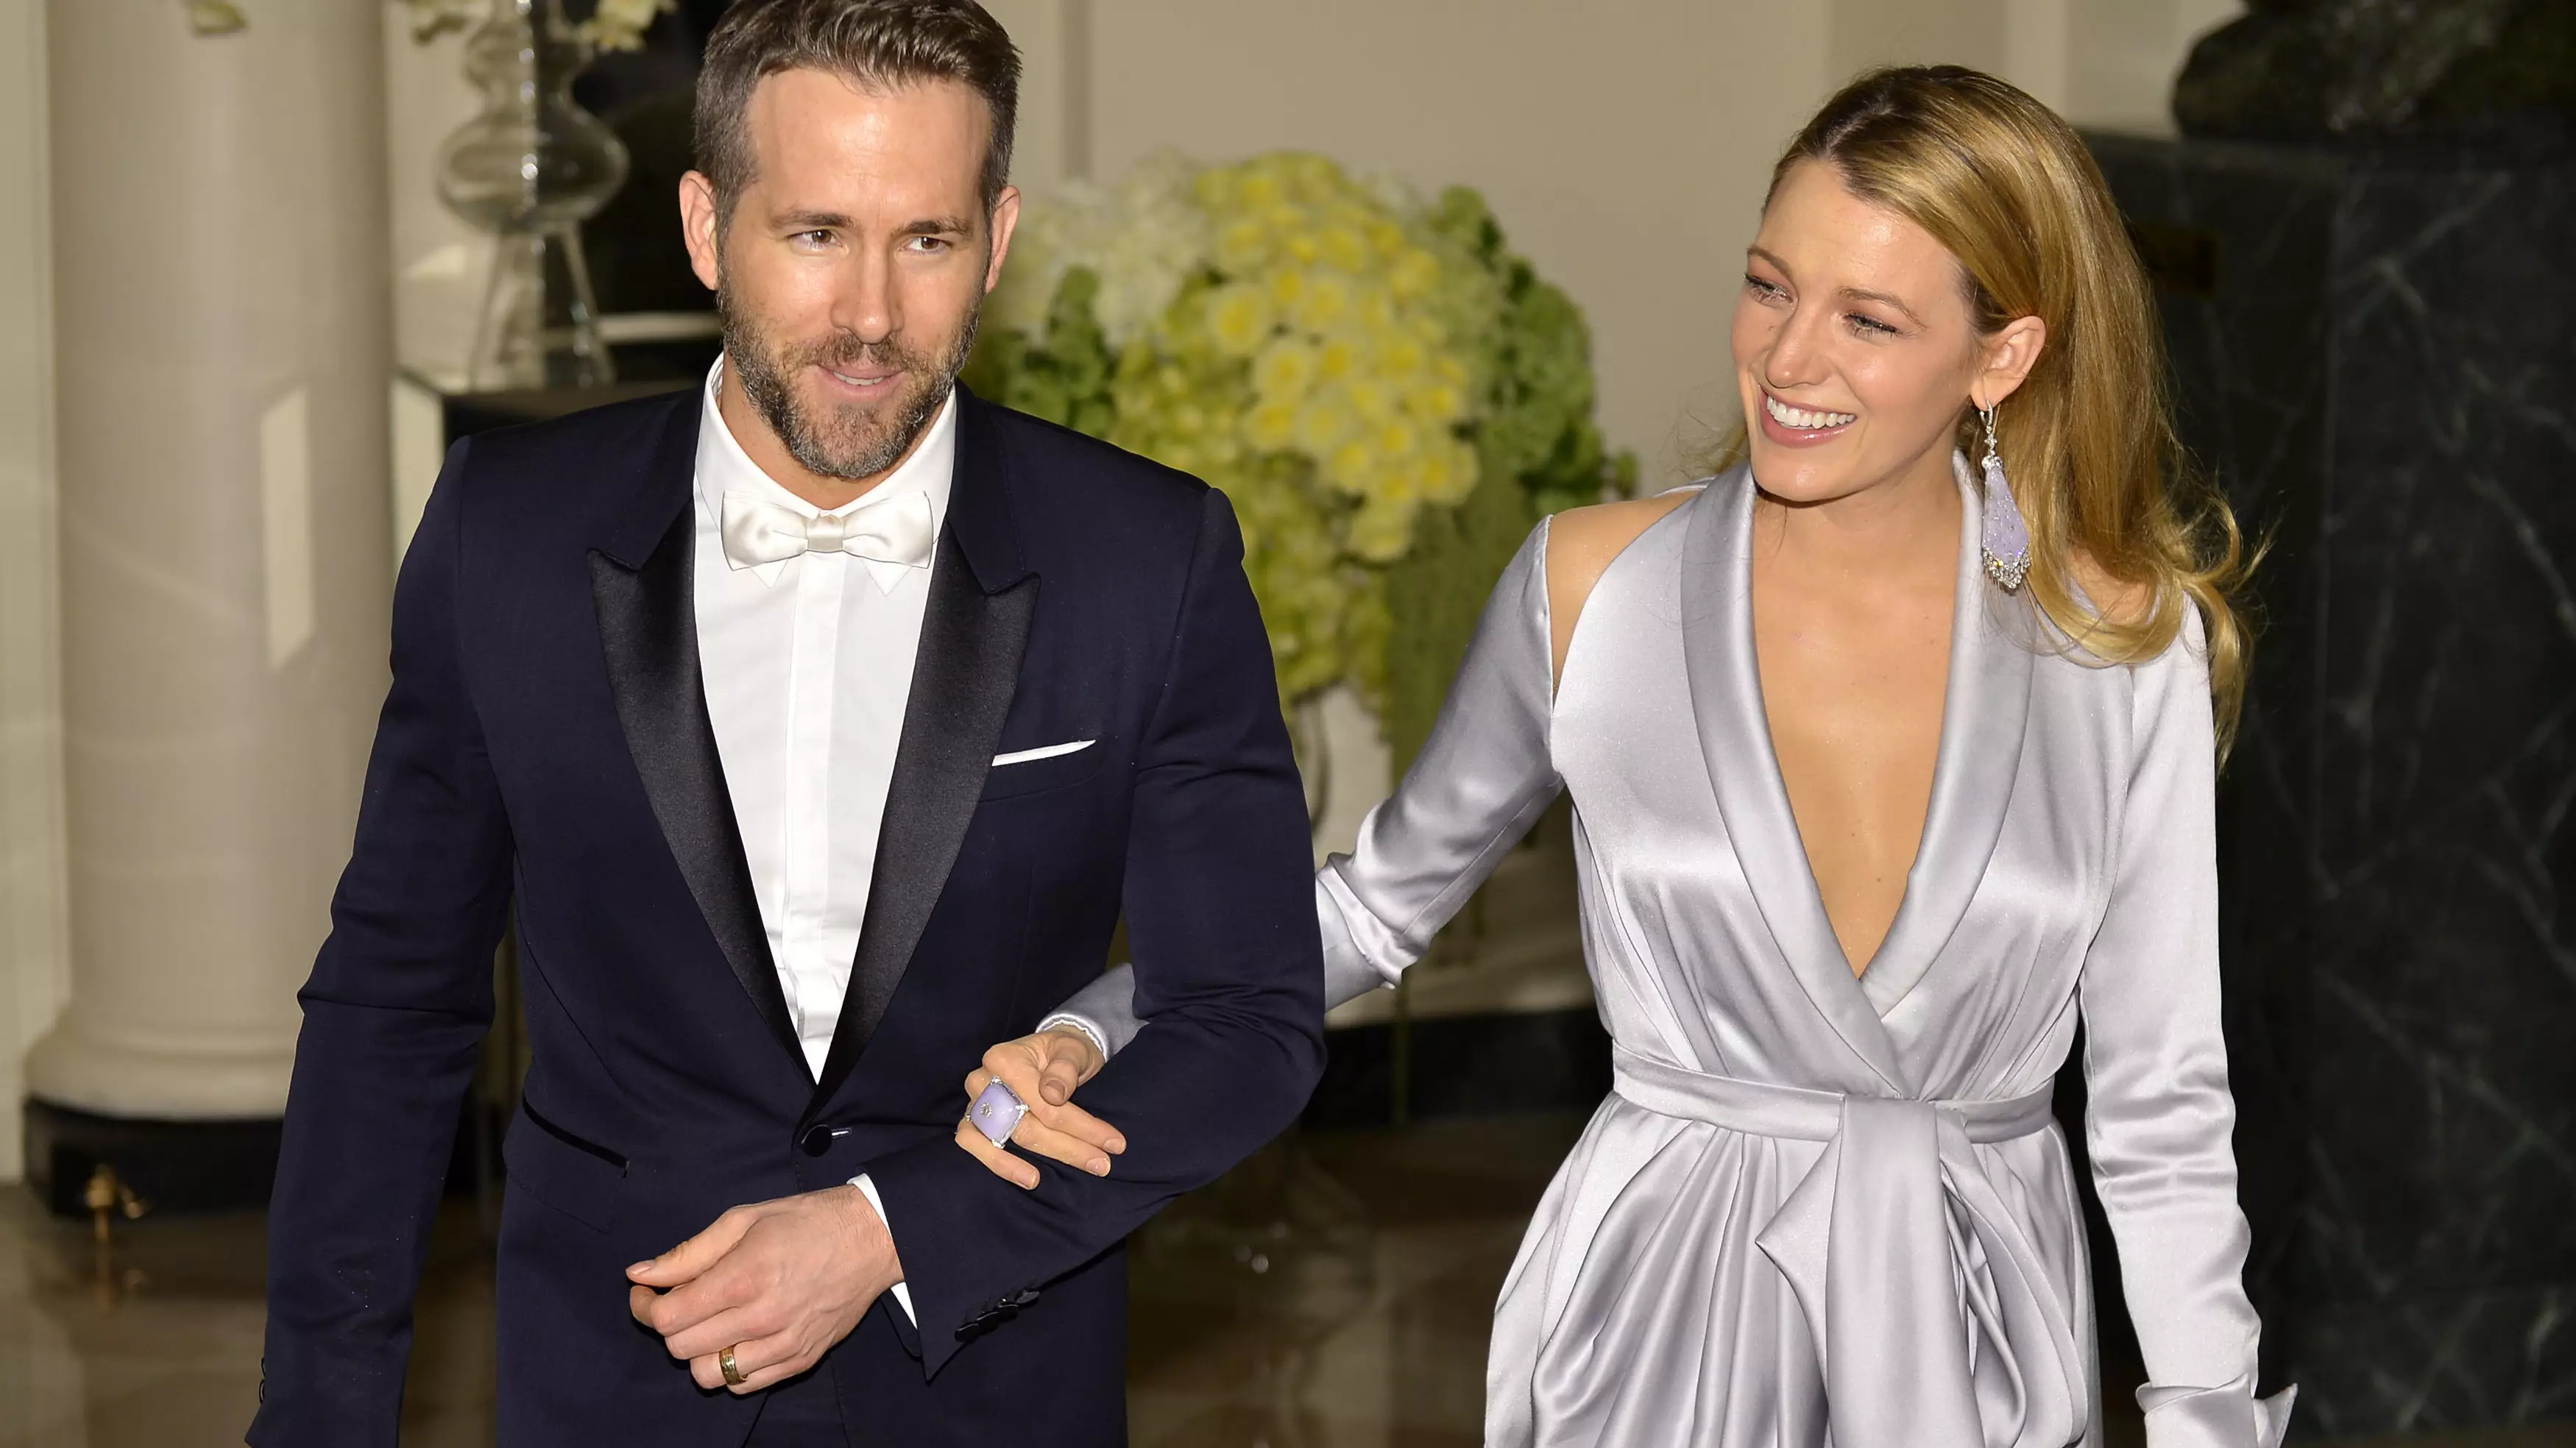 Blake Lively Slams Instagram Account For Posting 'Disturbing' Photos Of Her And Ryan Reynolds' Kids